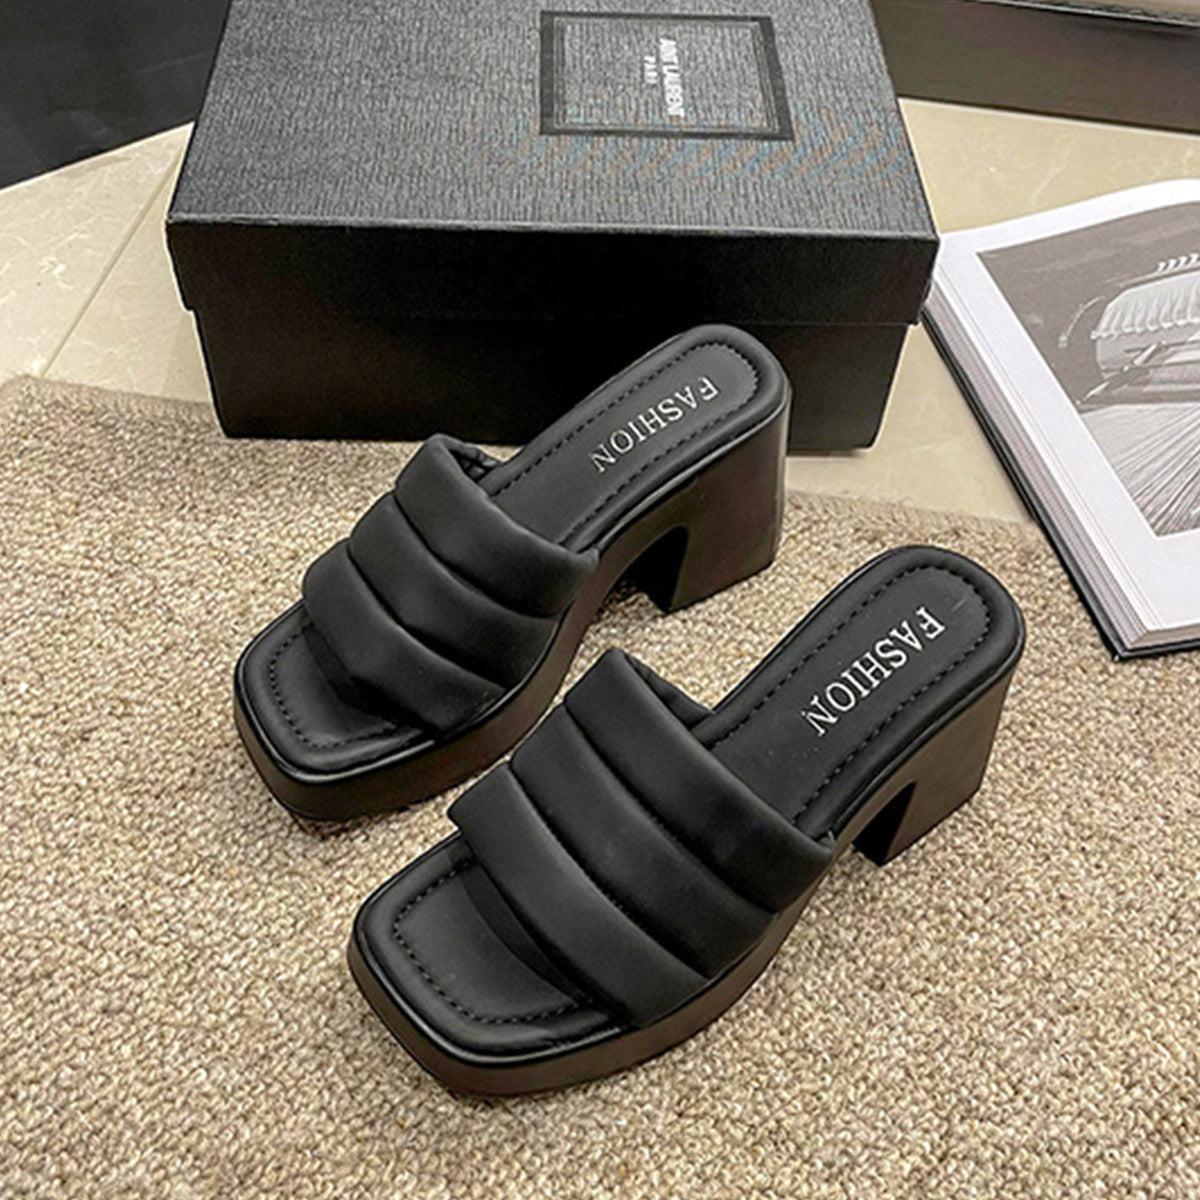 a pair of black sandals sitting on top of a table